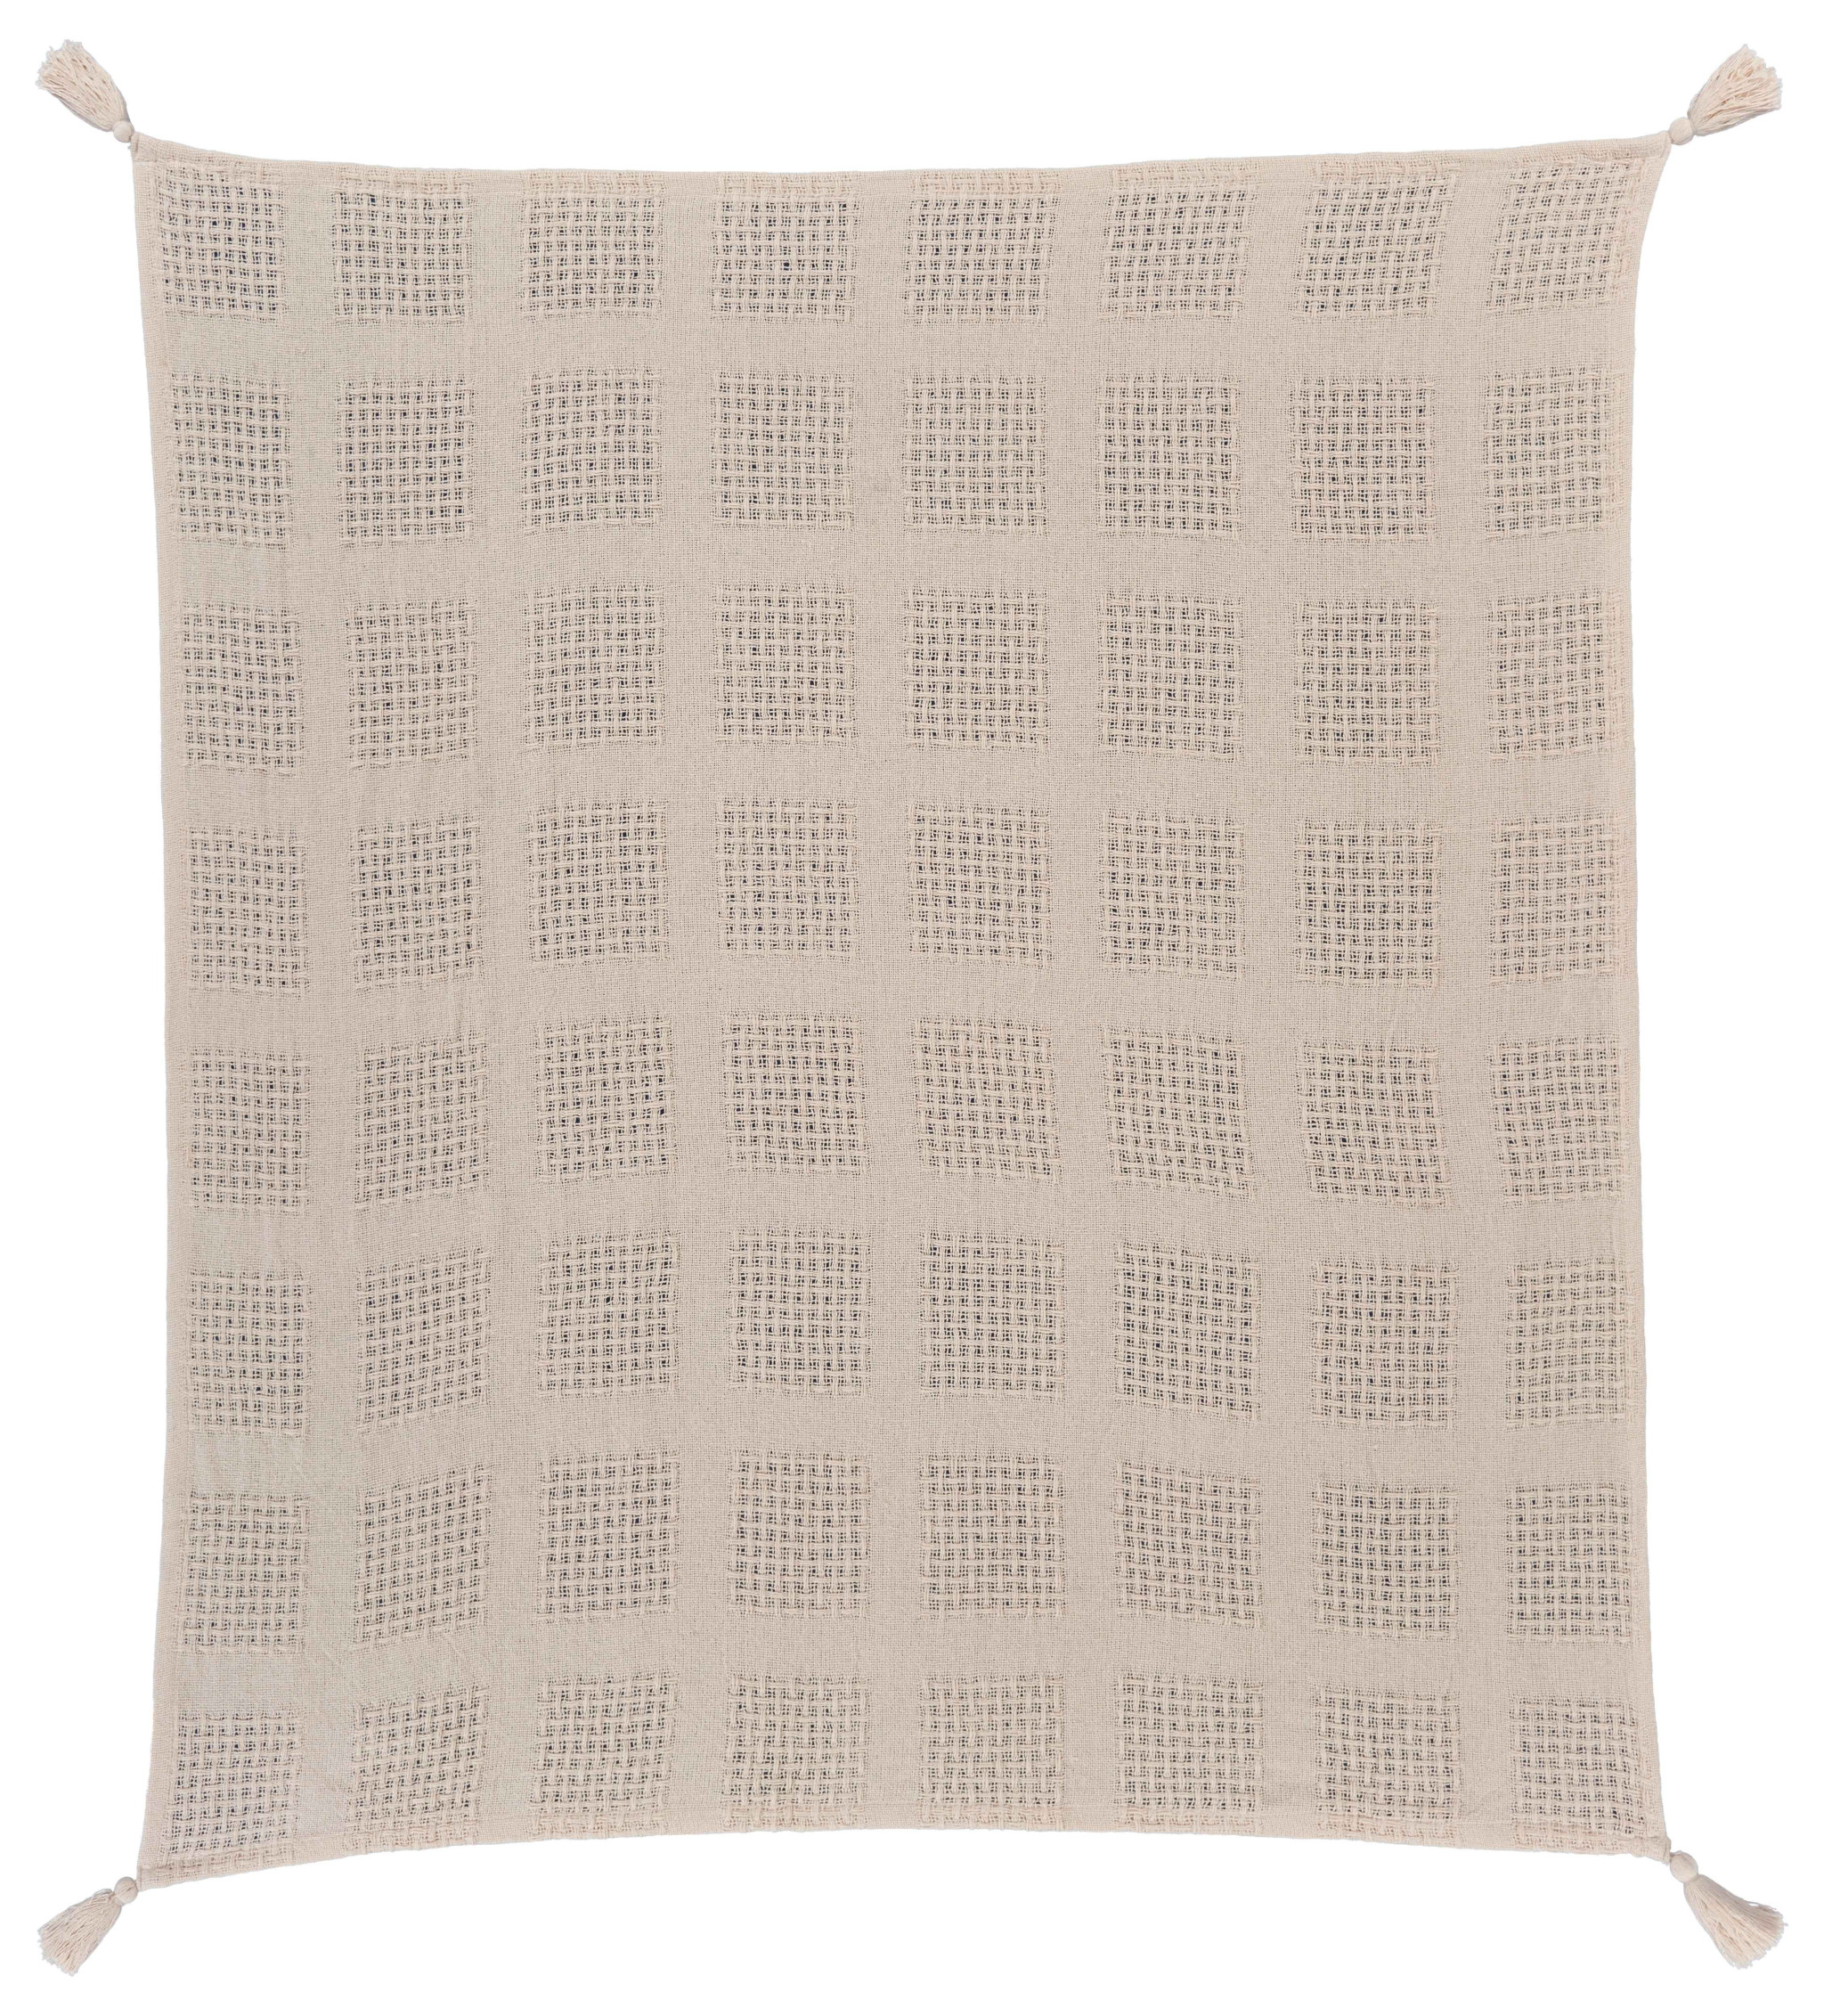 Cream Woven Cotton Solid Color Throw Blanket-516505-1